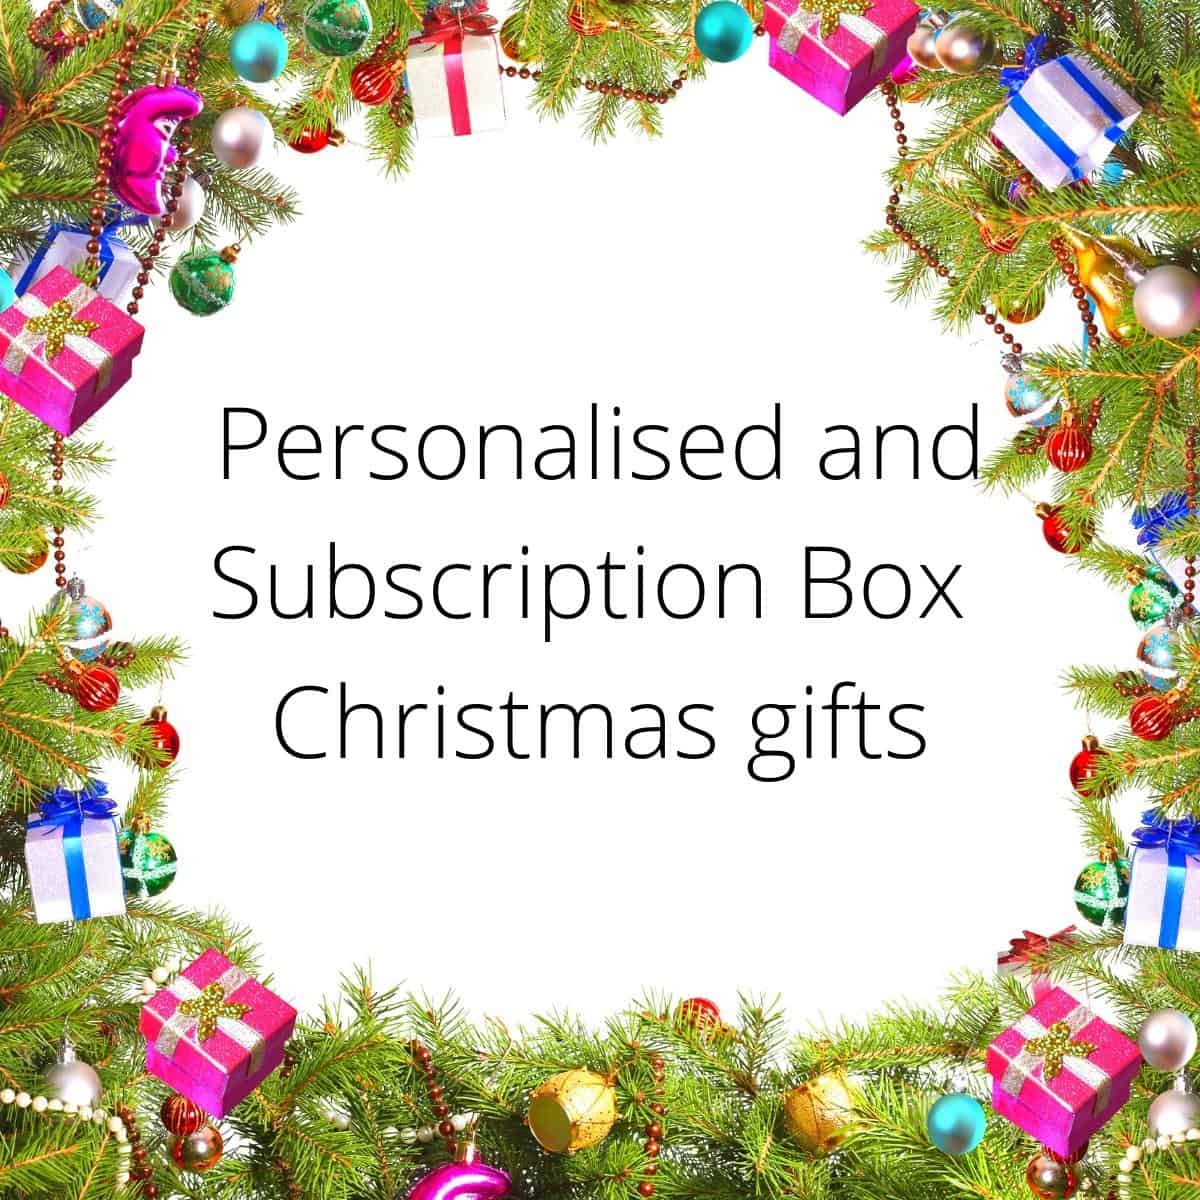 Personalised Christmas gifts and subscription gifts